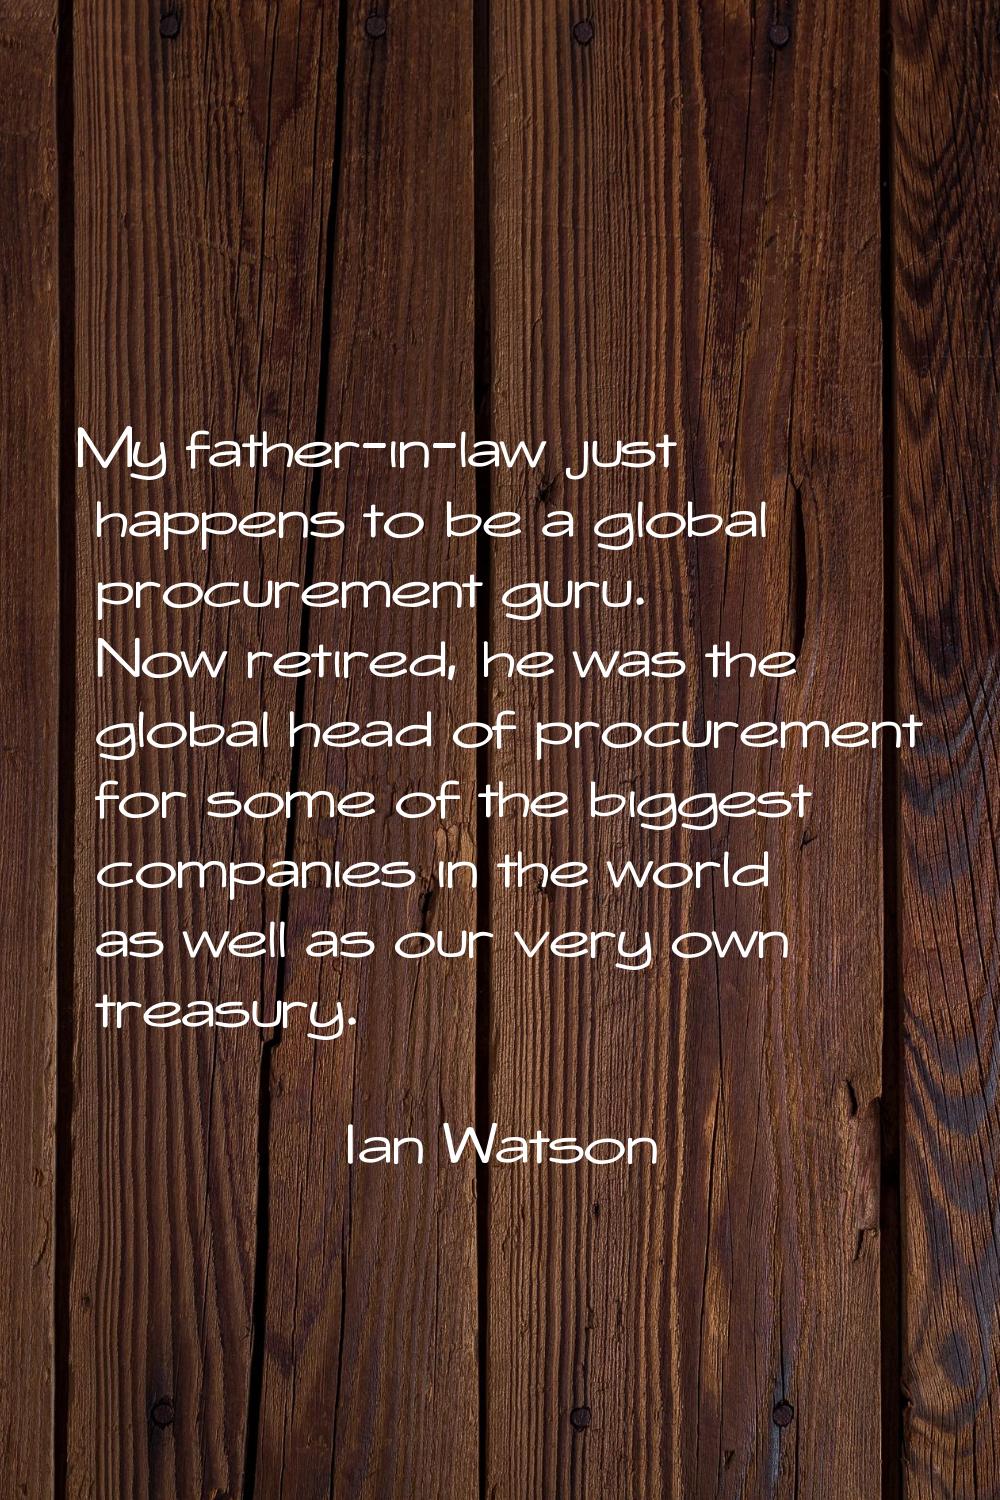 My father-in-law just happens to be a global procurement guru. Now retired, he was the global head 